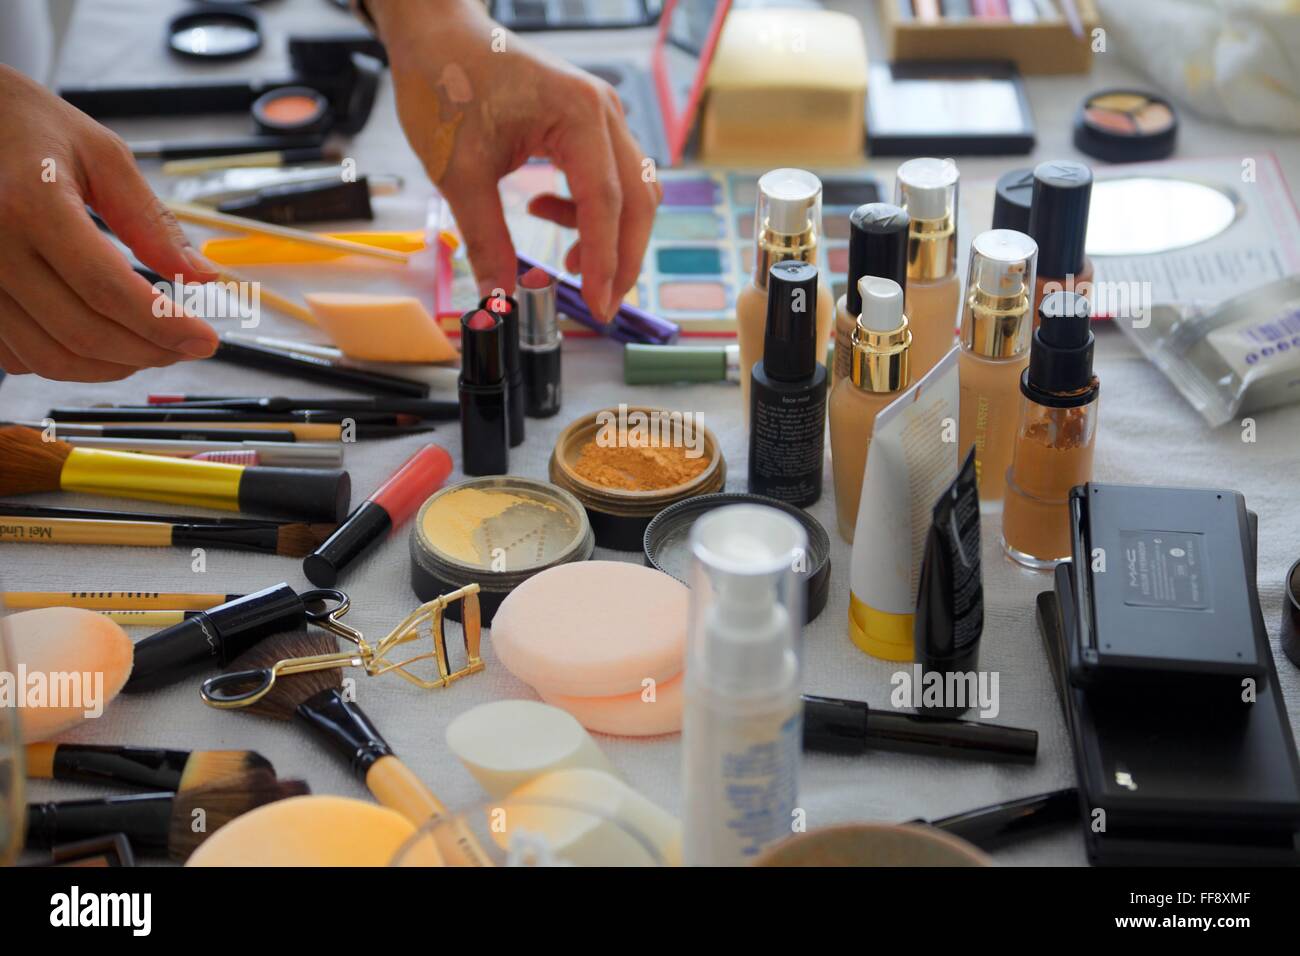 A close up of a make up table Stock Photo